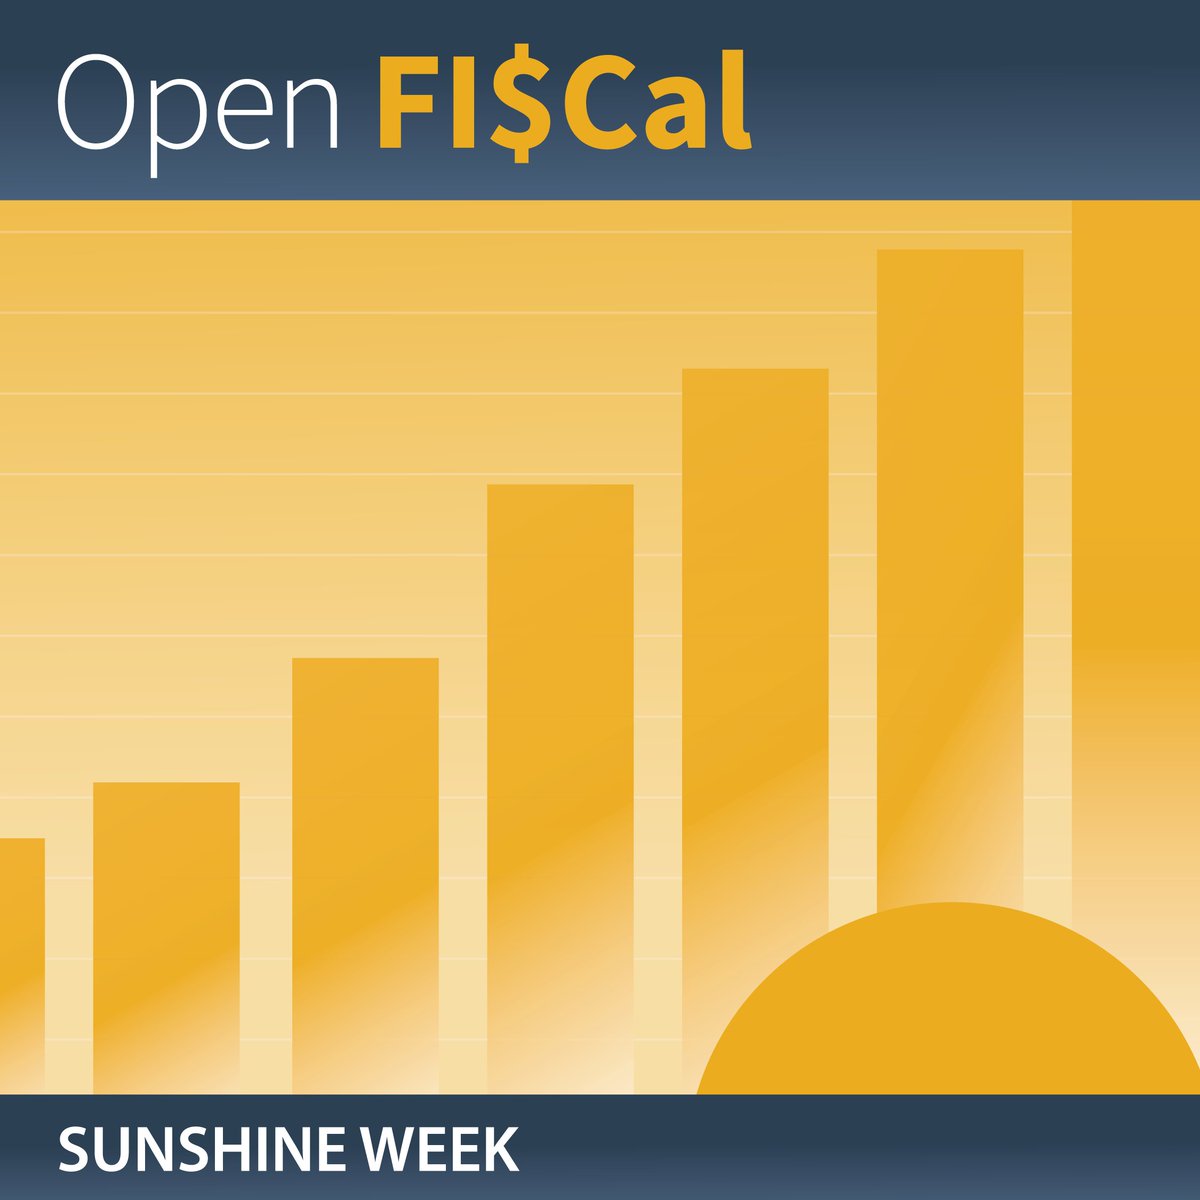 During #SunshineWeek, we’re proud to shine a light on government information with our transparency website Open FI$Cal. Open FI$Cal opened California’s “books” to make state expenditure data available to the public. See data now: Open.fiscal.ca.gov #DataTransparency